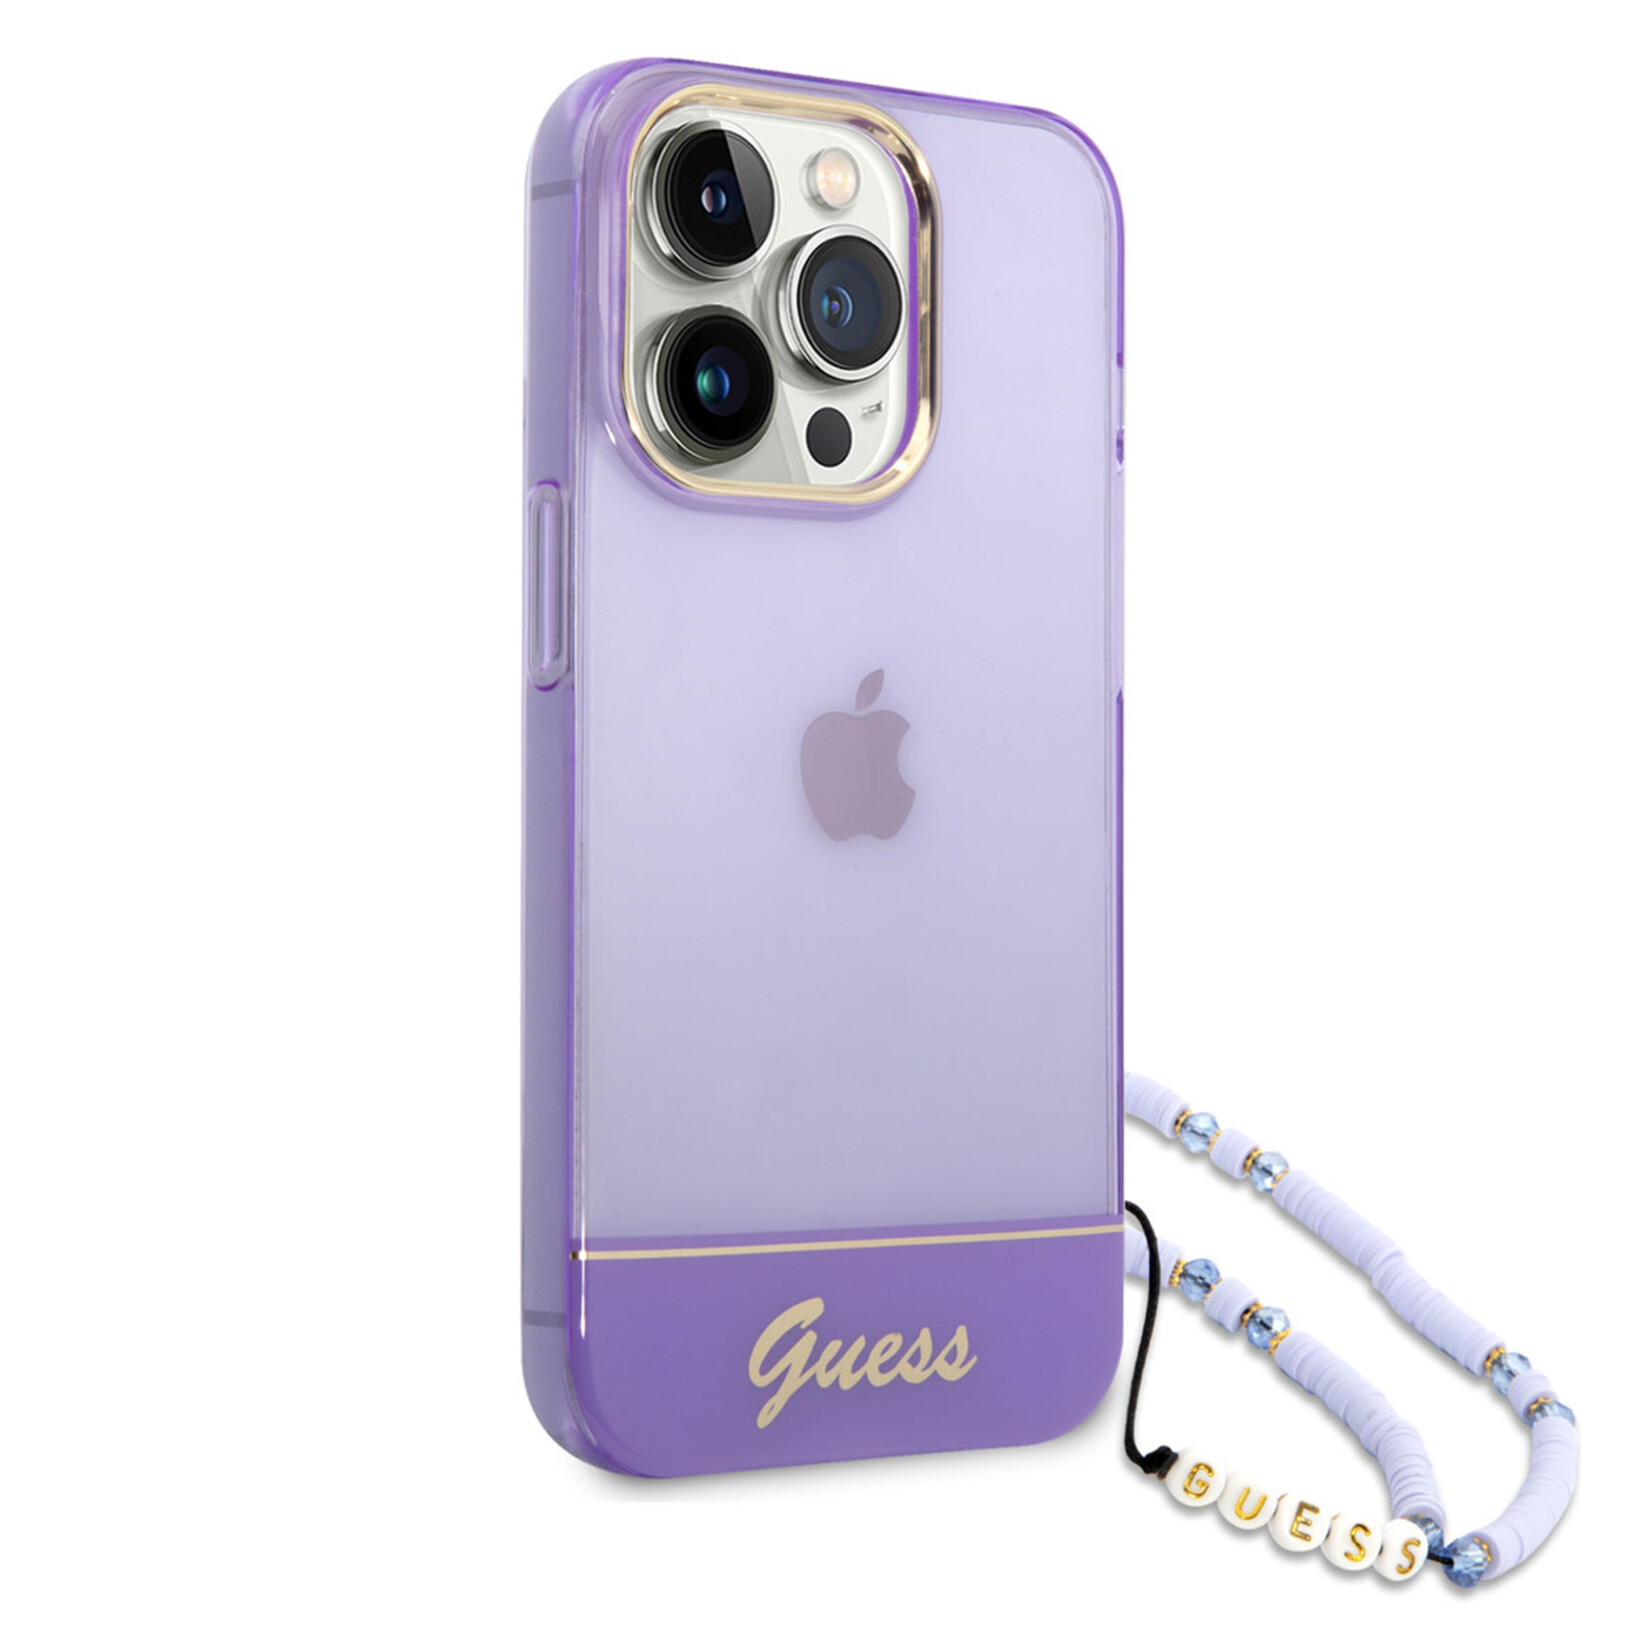 Guess GUESS TPU Back Cover Telefoonhoesje voor Apple iPhone 14 Pro Max - Paars Transparant - Bescherming & Stijl